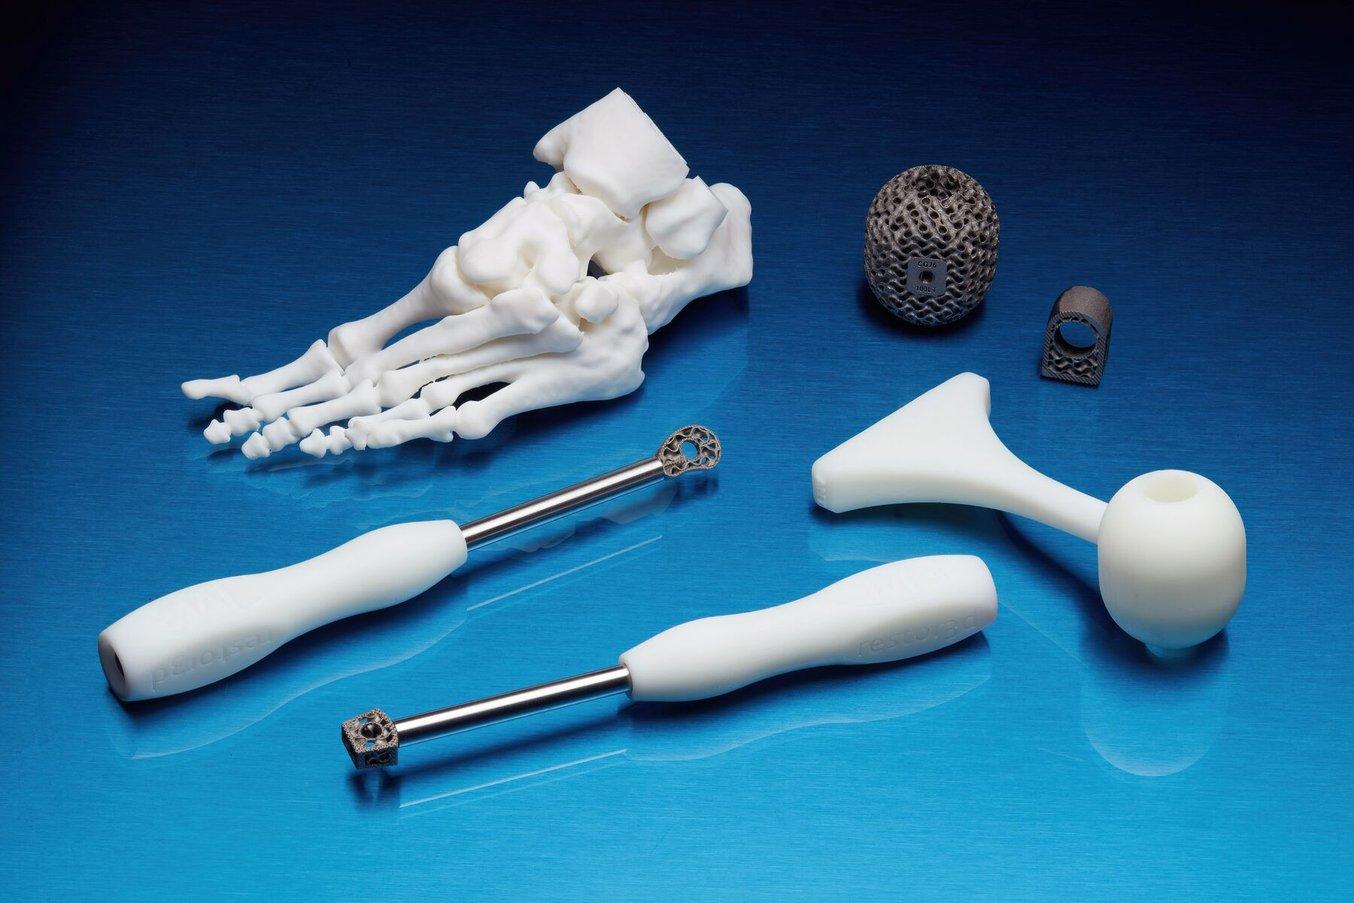 3D printed anatomical model and surgical tools